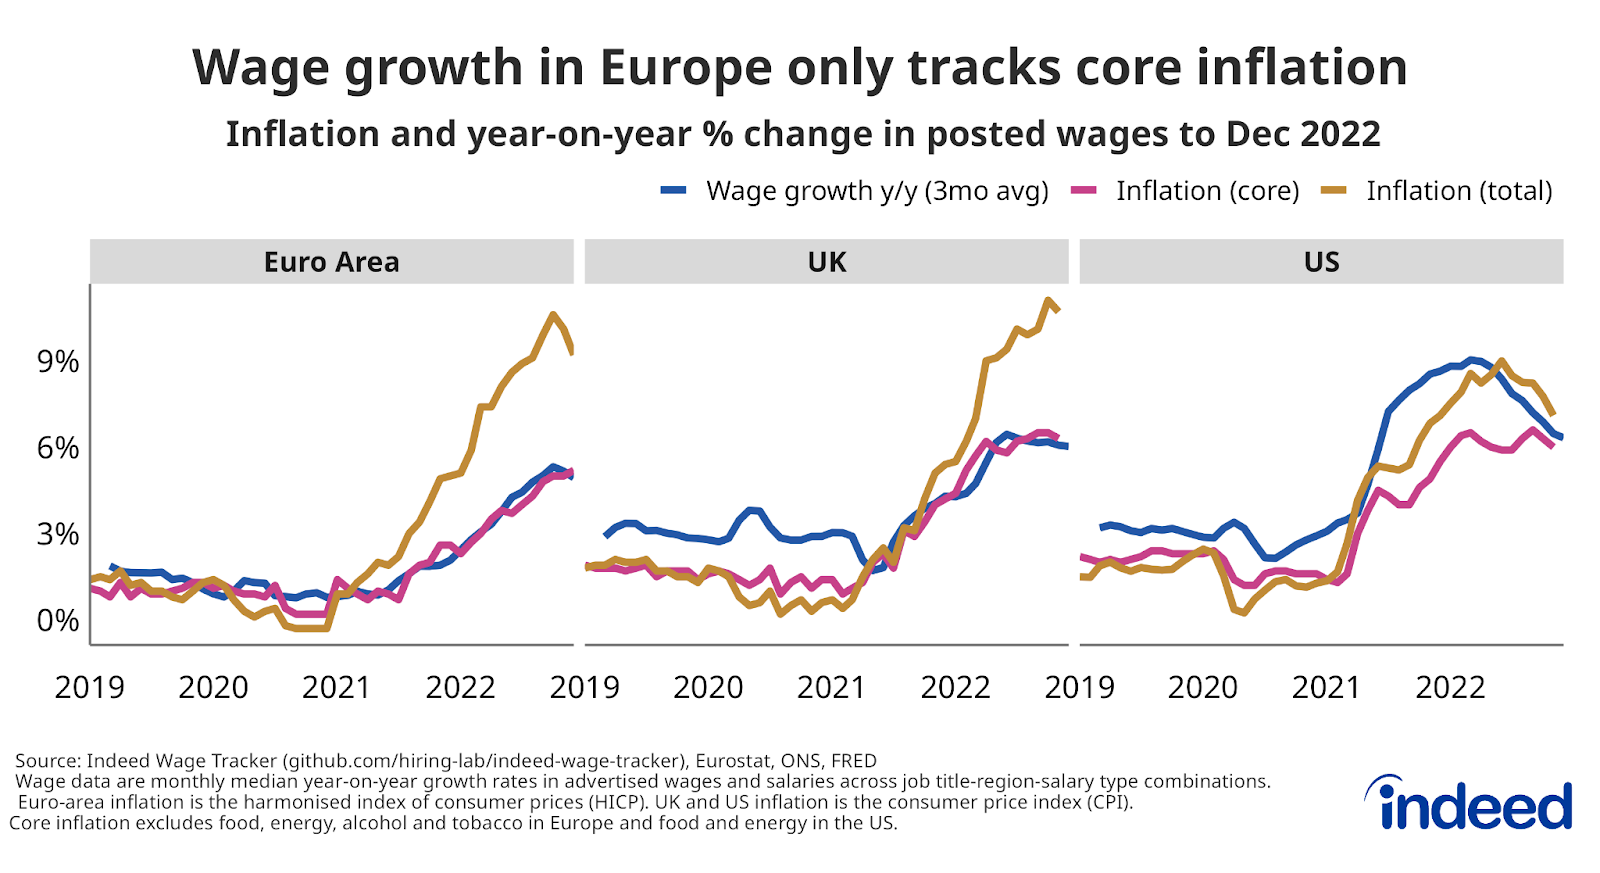 Series of line charts titled “Wage growth in Europe only tracks core inflation.”